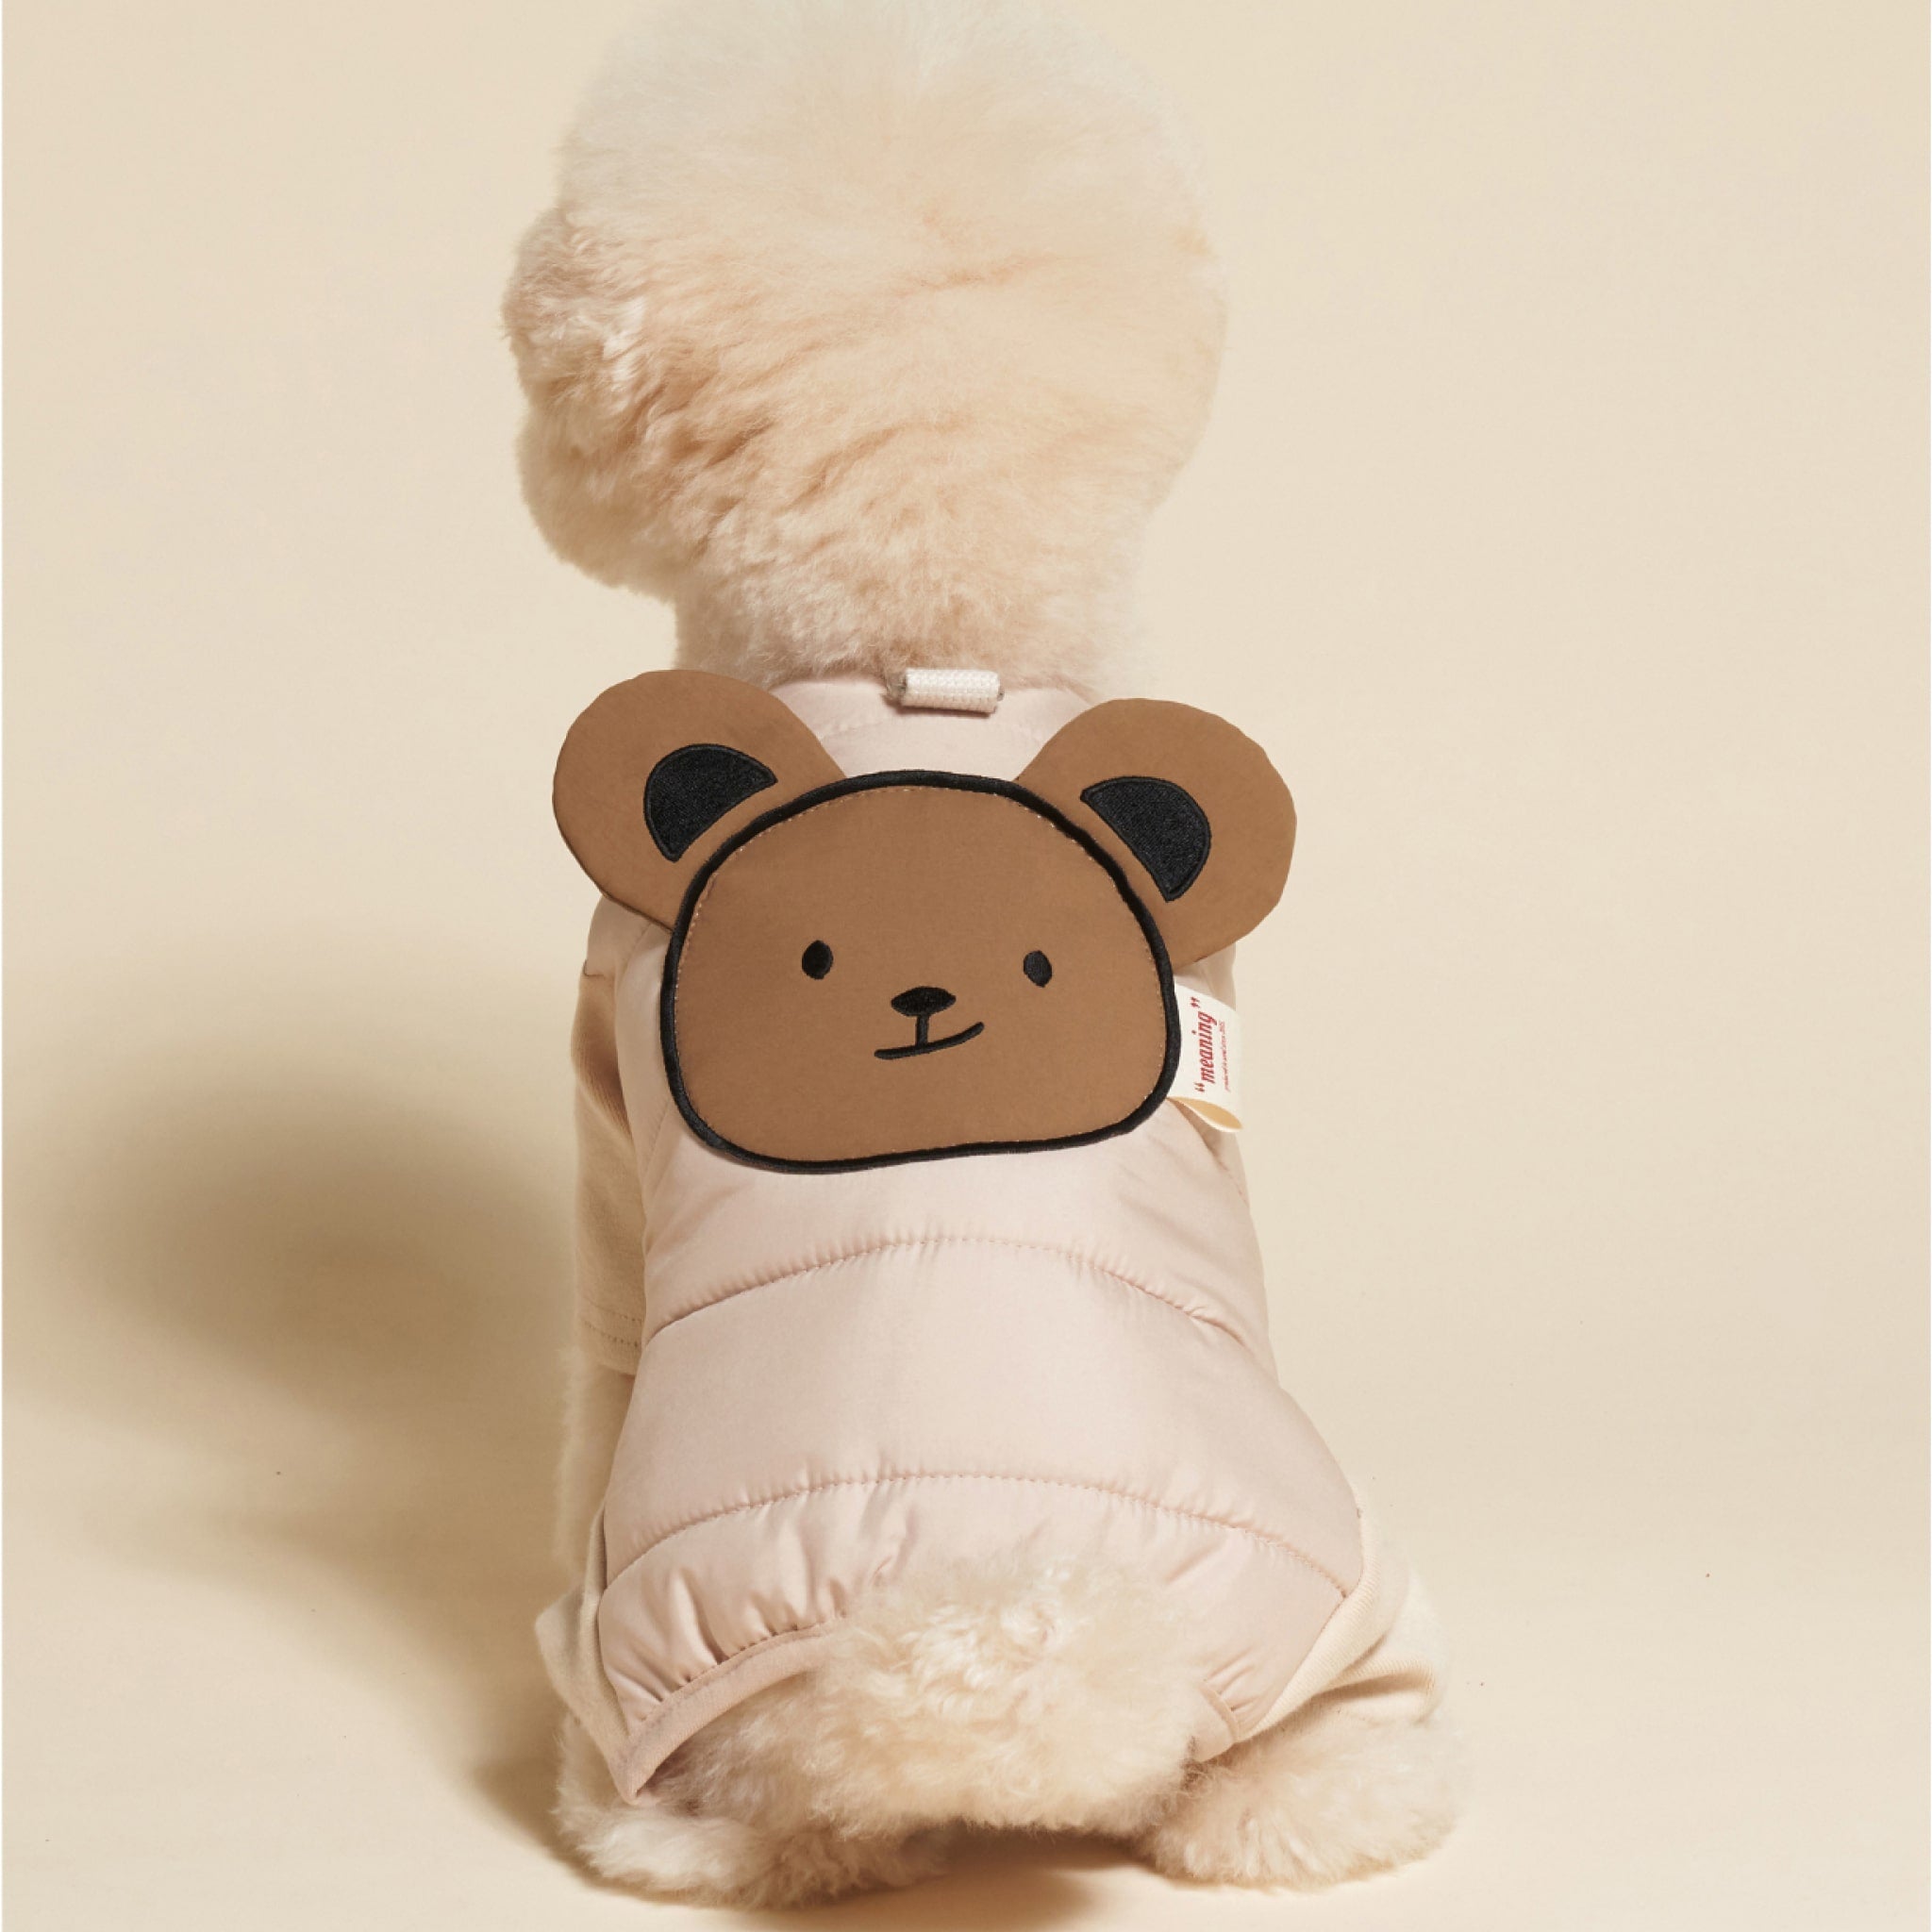 Dog wearing beige padded bear jumpsuit while sitting, showing the back